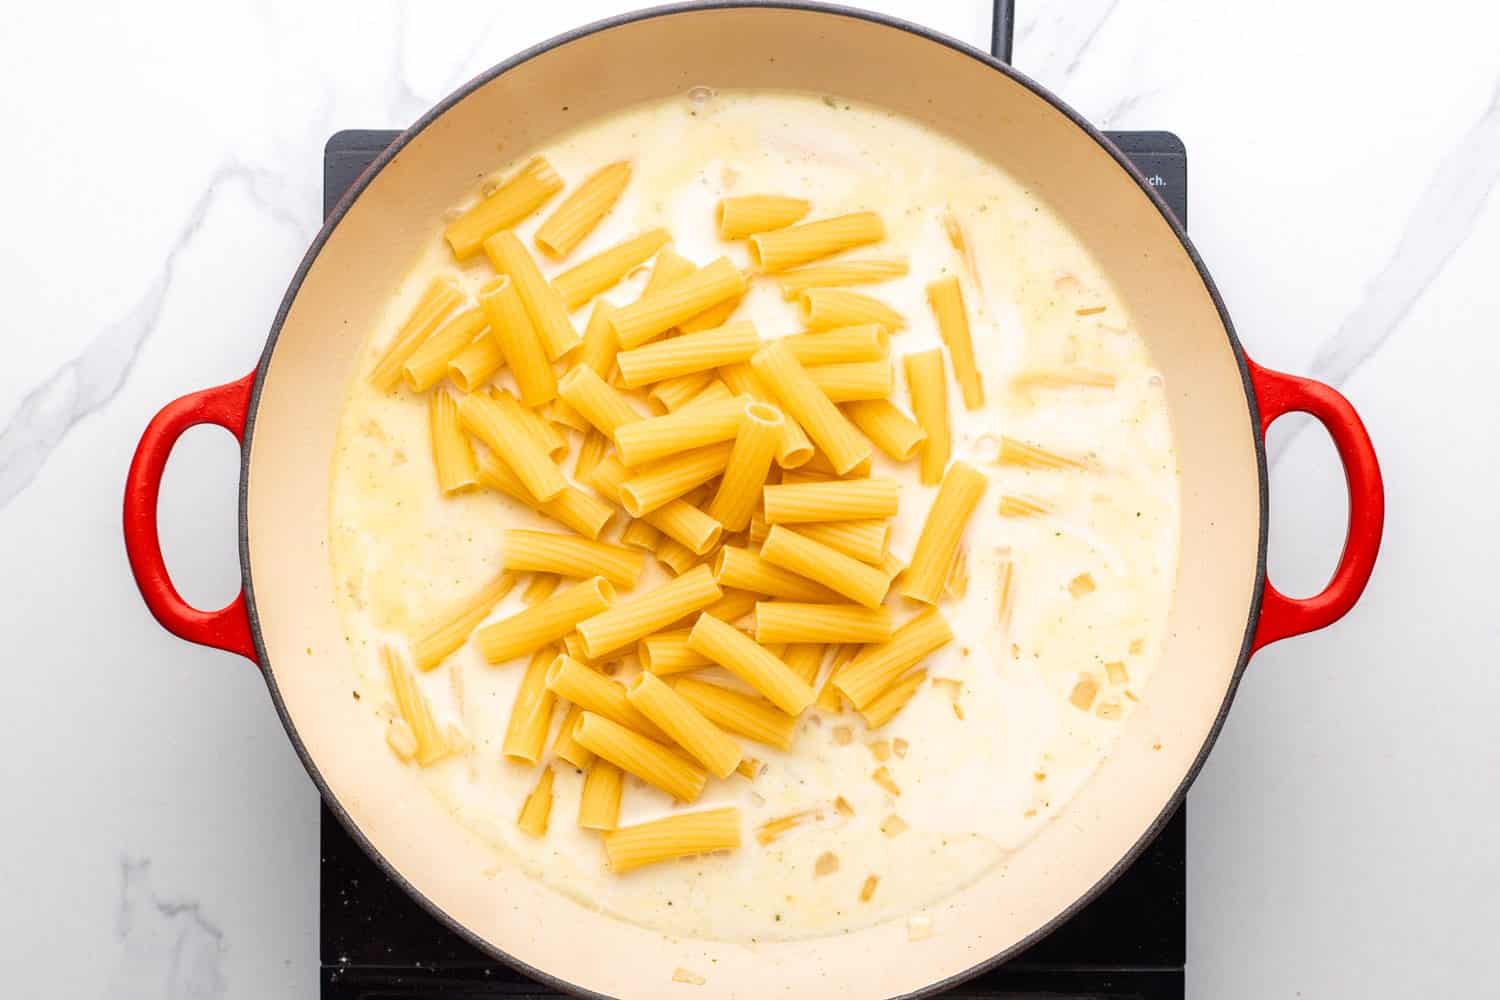 uncooked pasta added to a creamy parmesan sauce in a large skillet, viewed from above.